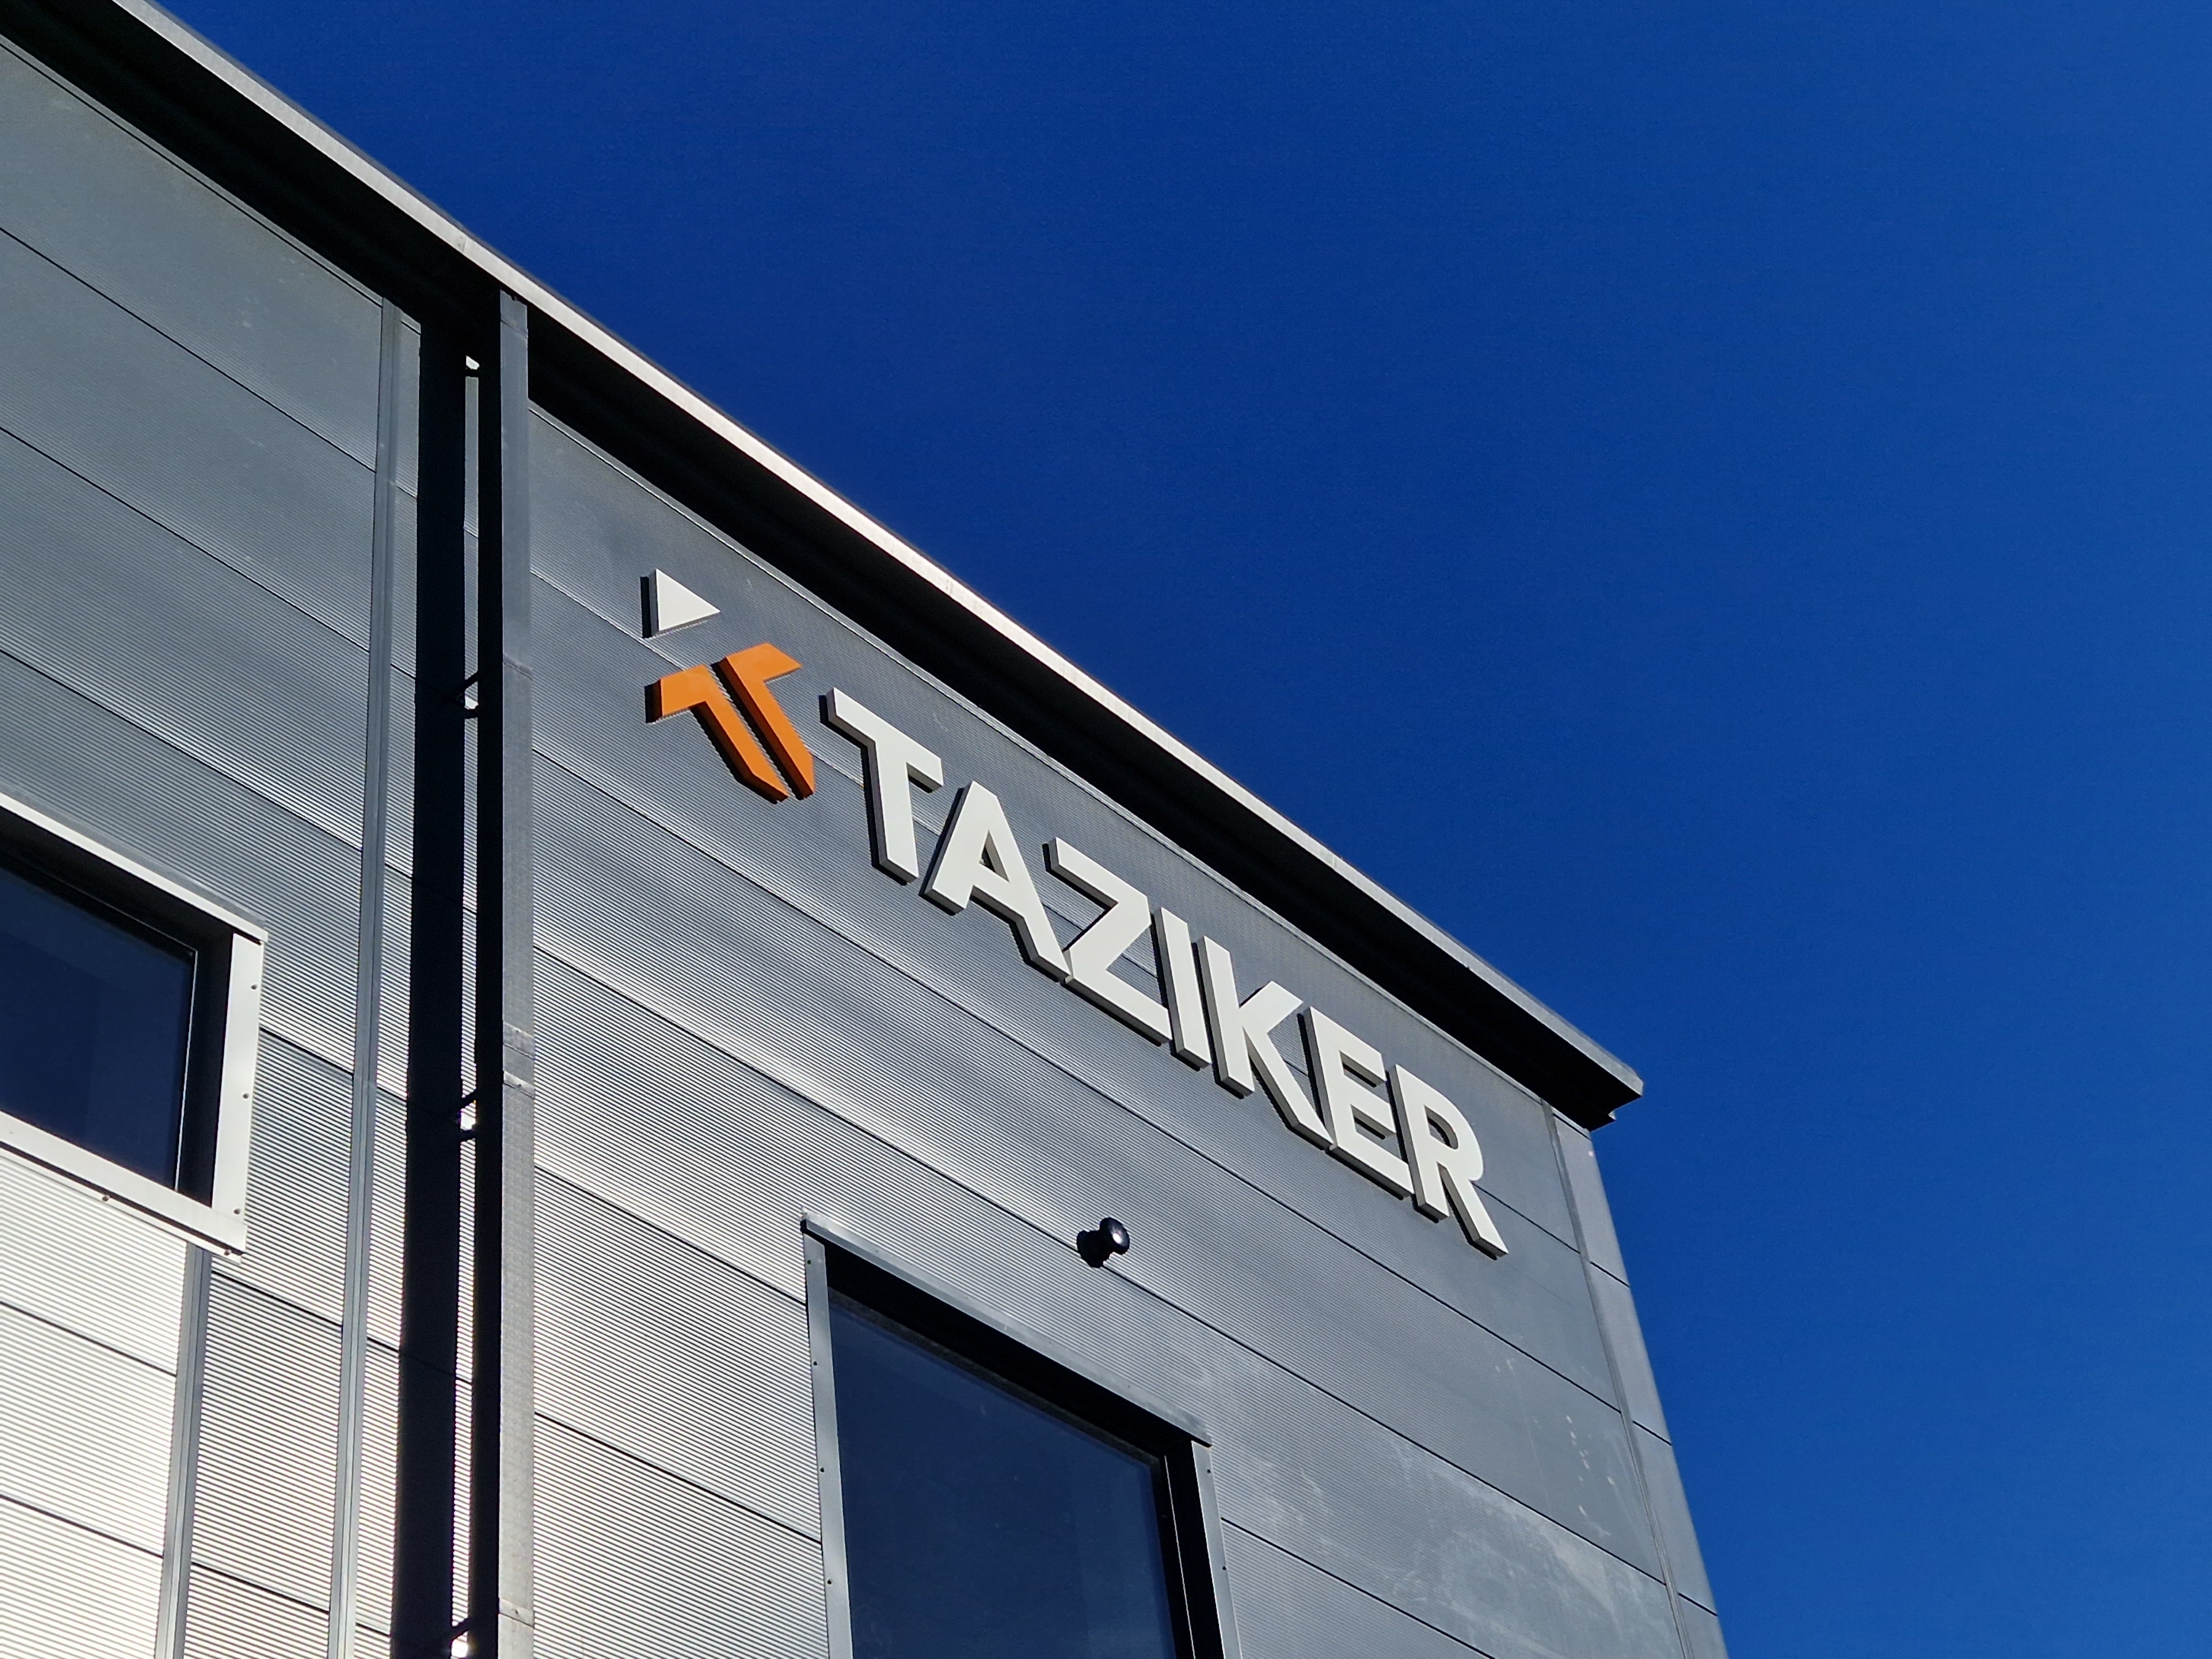 Taziker signage on the outside of the new fabrication facility in Blackburn.